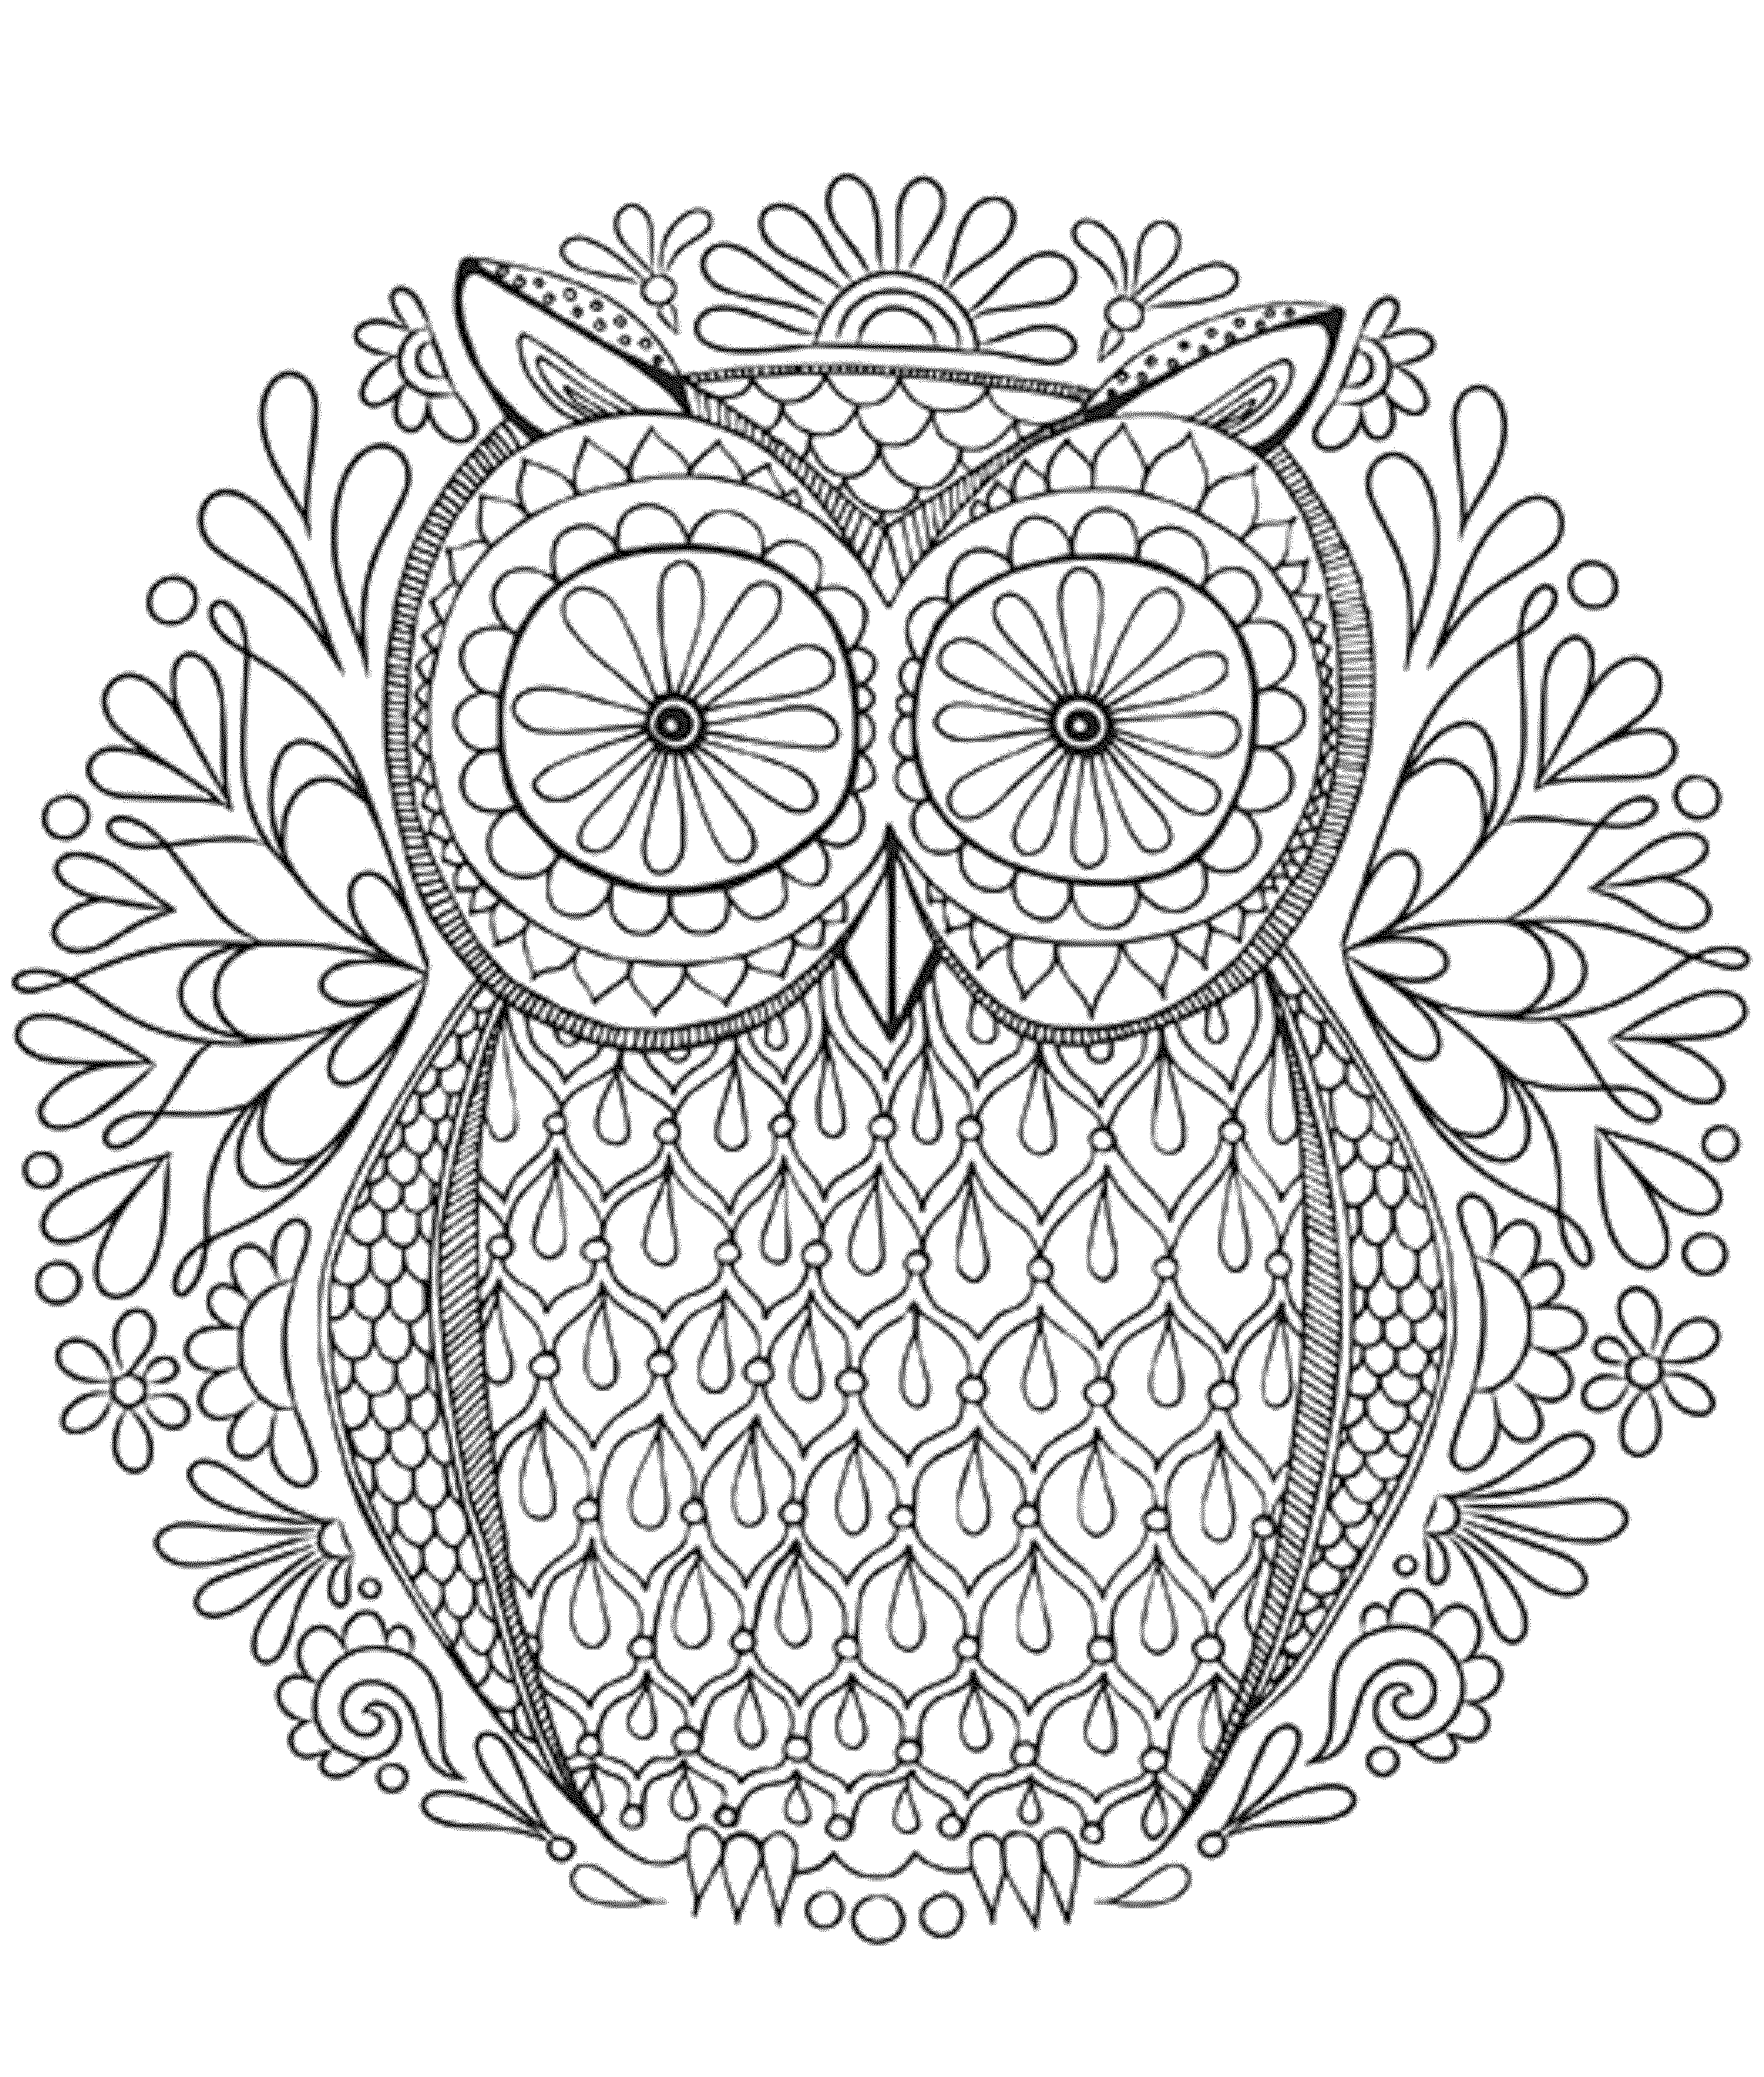 Owl Coloring Pages for Adults #3069 Adult Coloring Pages Printable ...